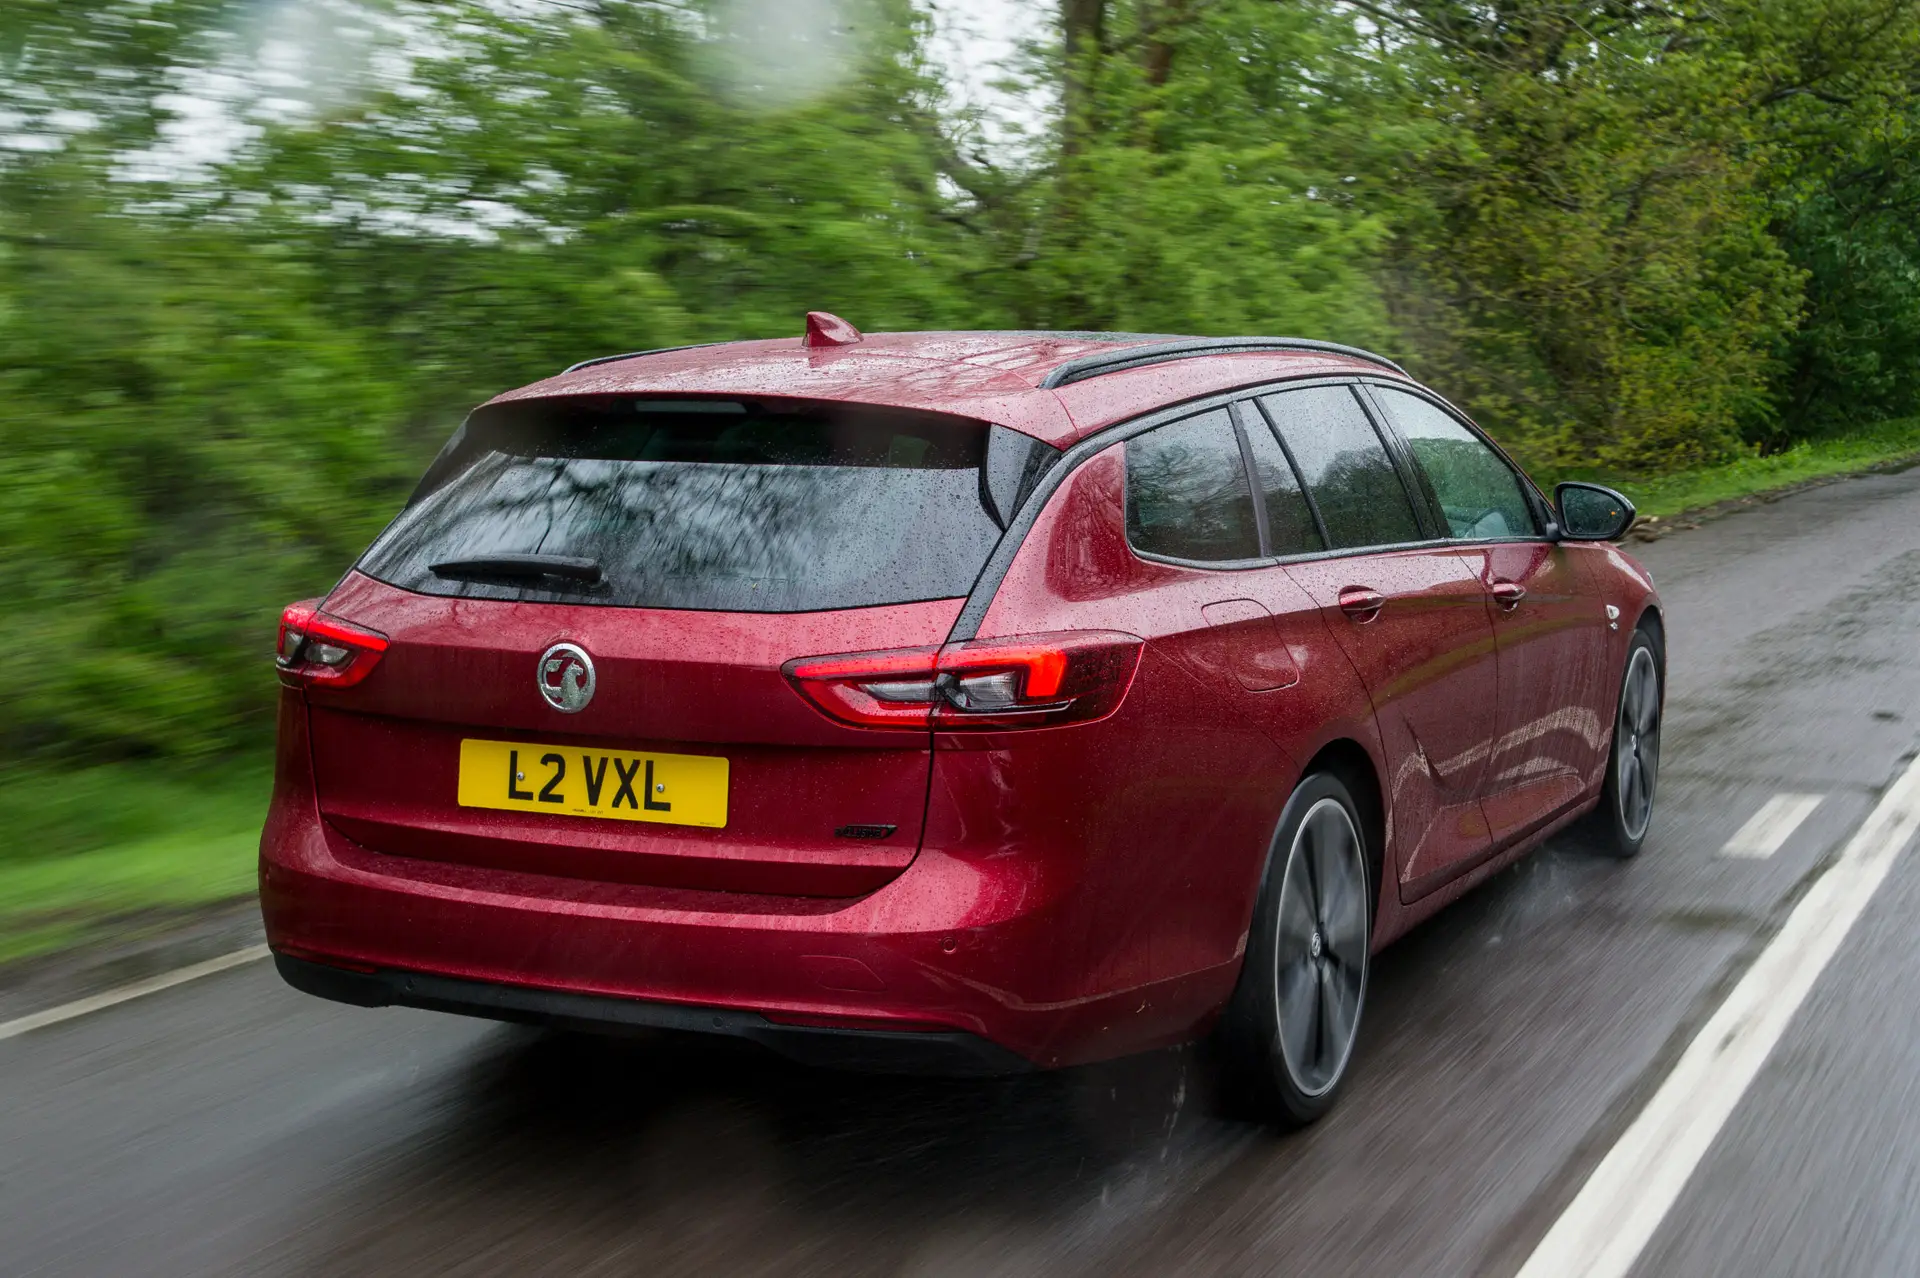 Used Vauxhall Insignia Sports Tourer (2017-2019) Review: exterior rear three quarter photo of the Vauxhall Insignia Sports Tourer on the road